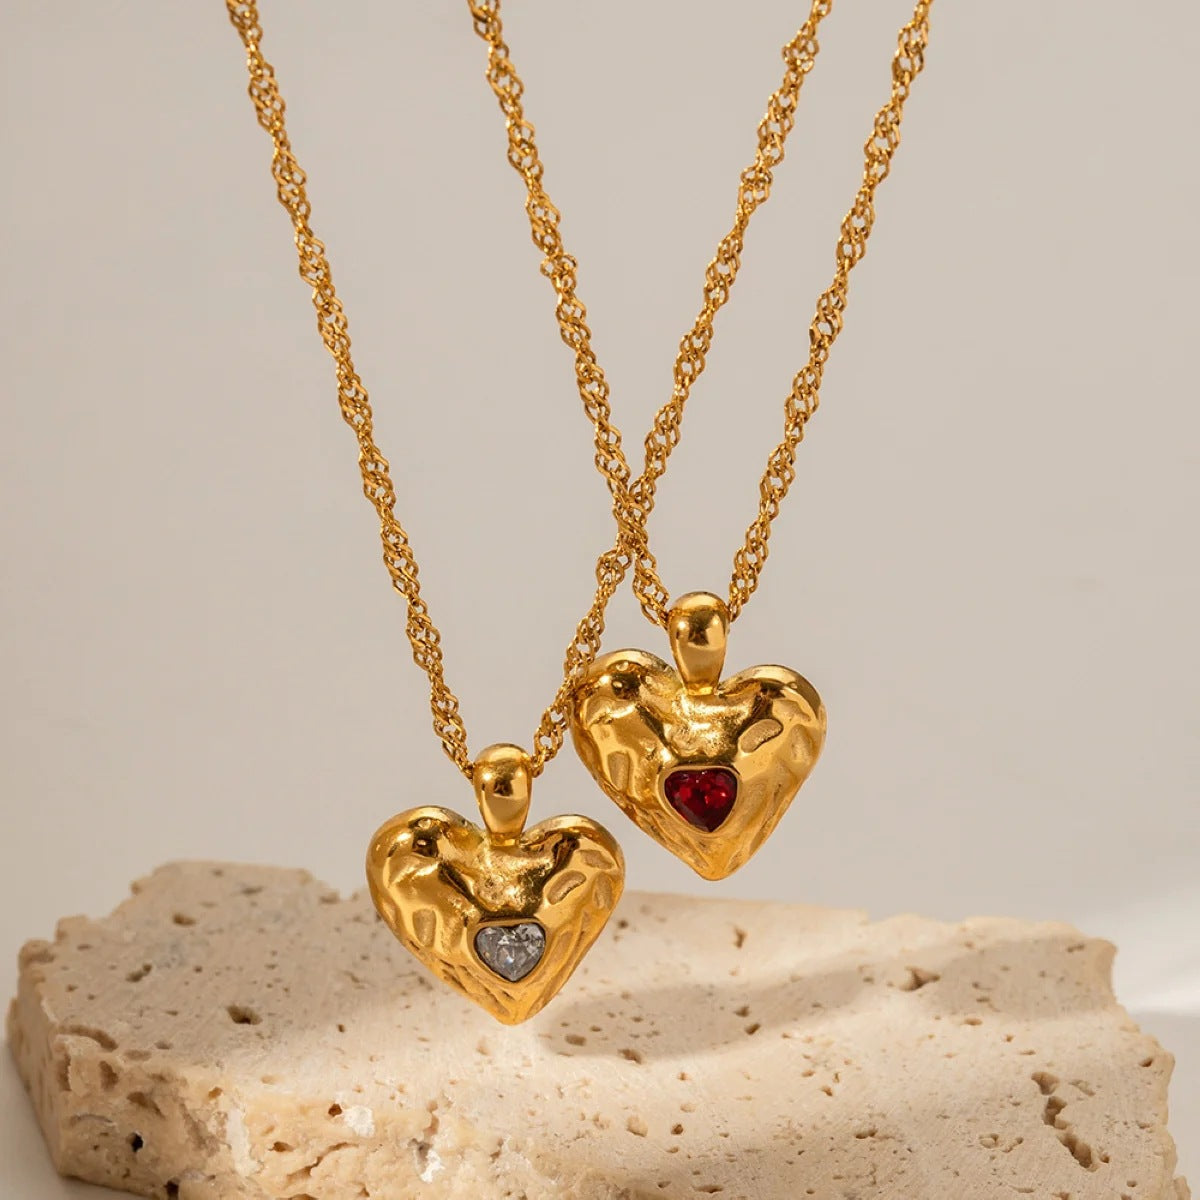 Alloy Heart-shaped Necklace With Diamond: Fashion INS Style Love Necklace